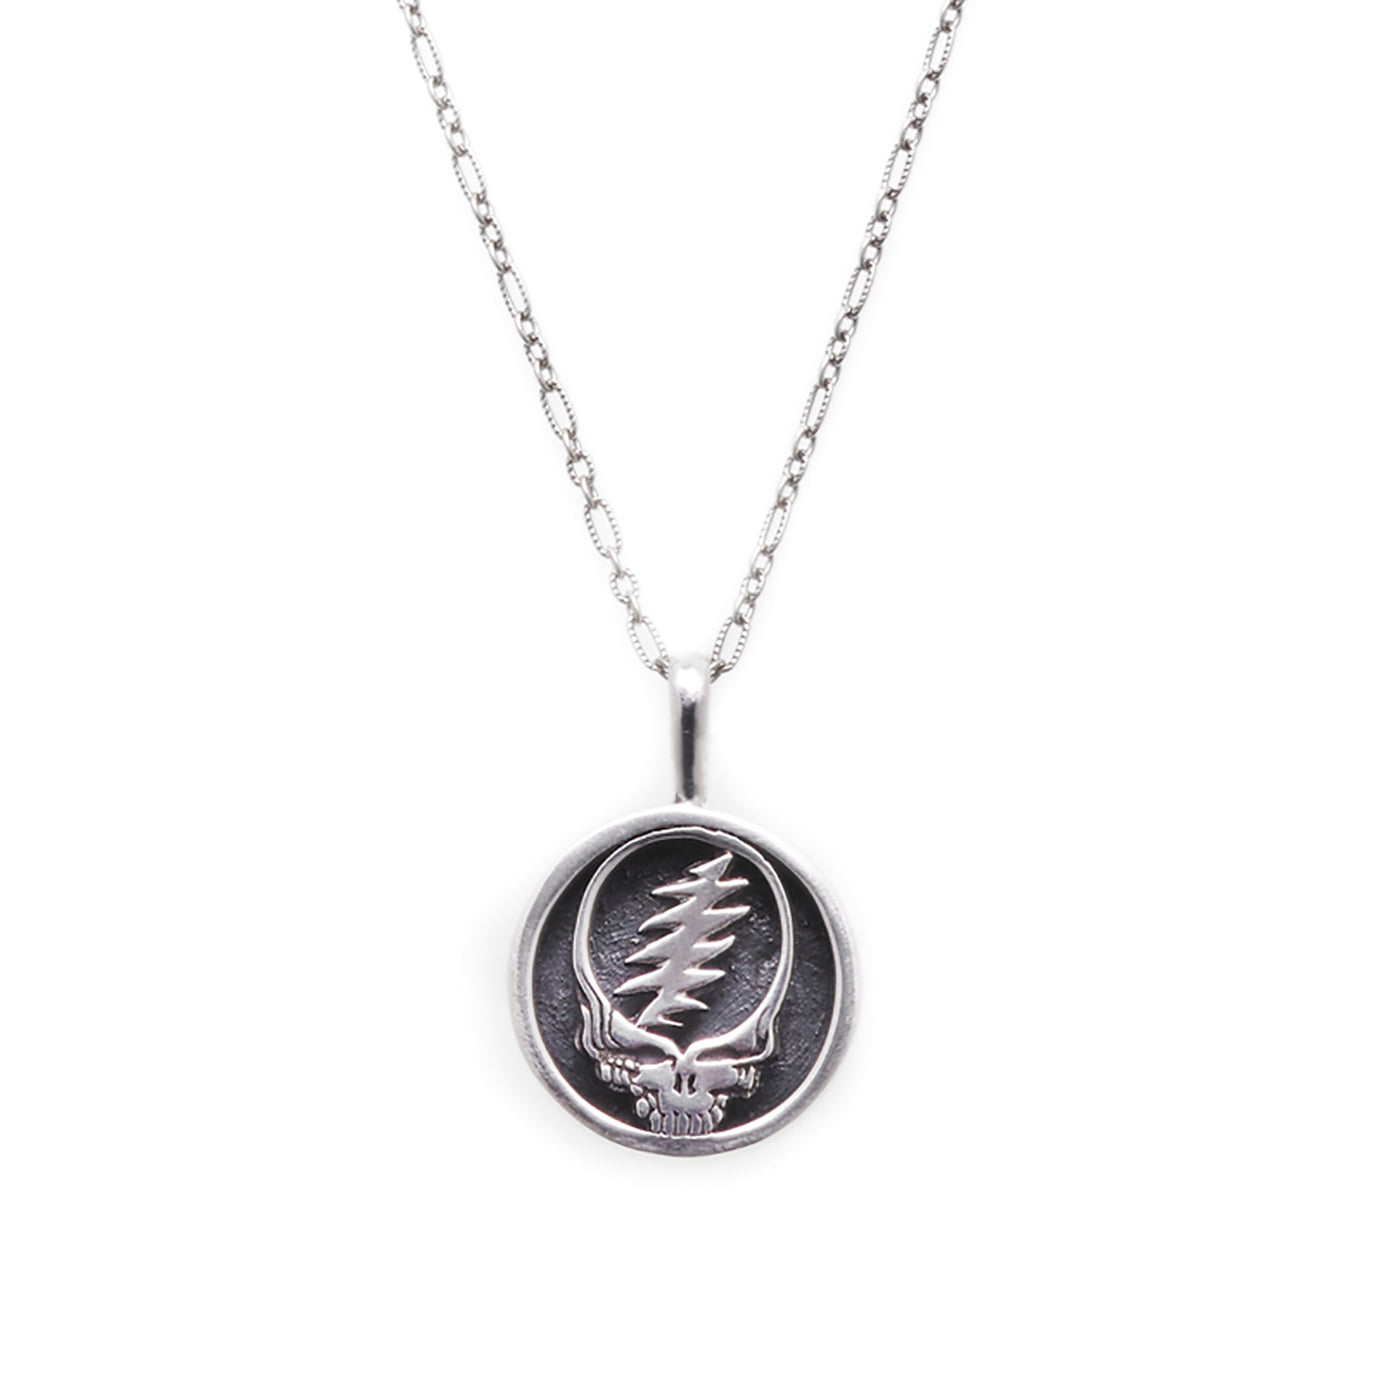 Steal Your Face Sterling Silver Charm Necklace